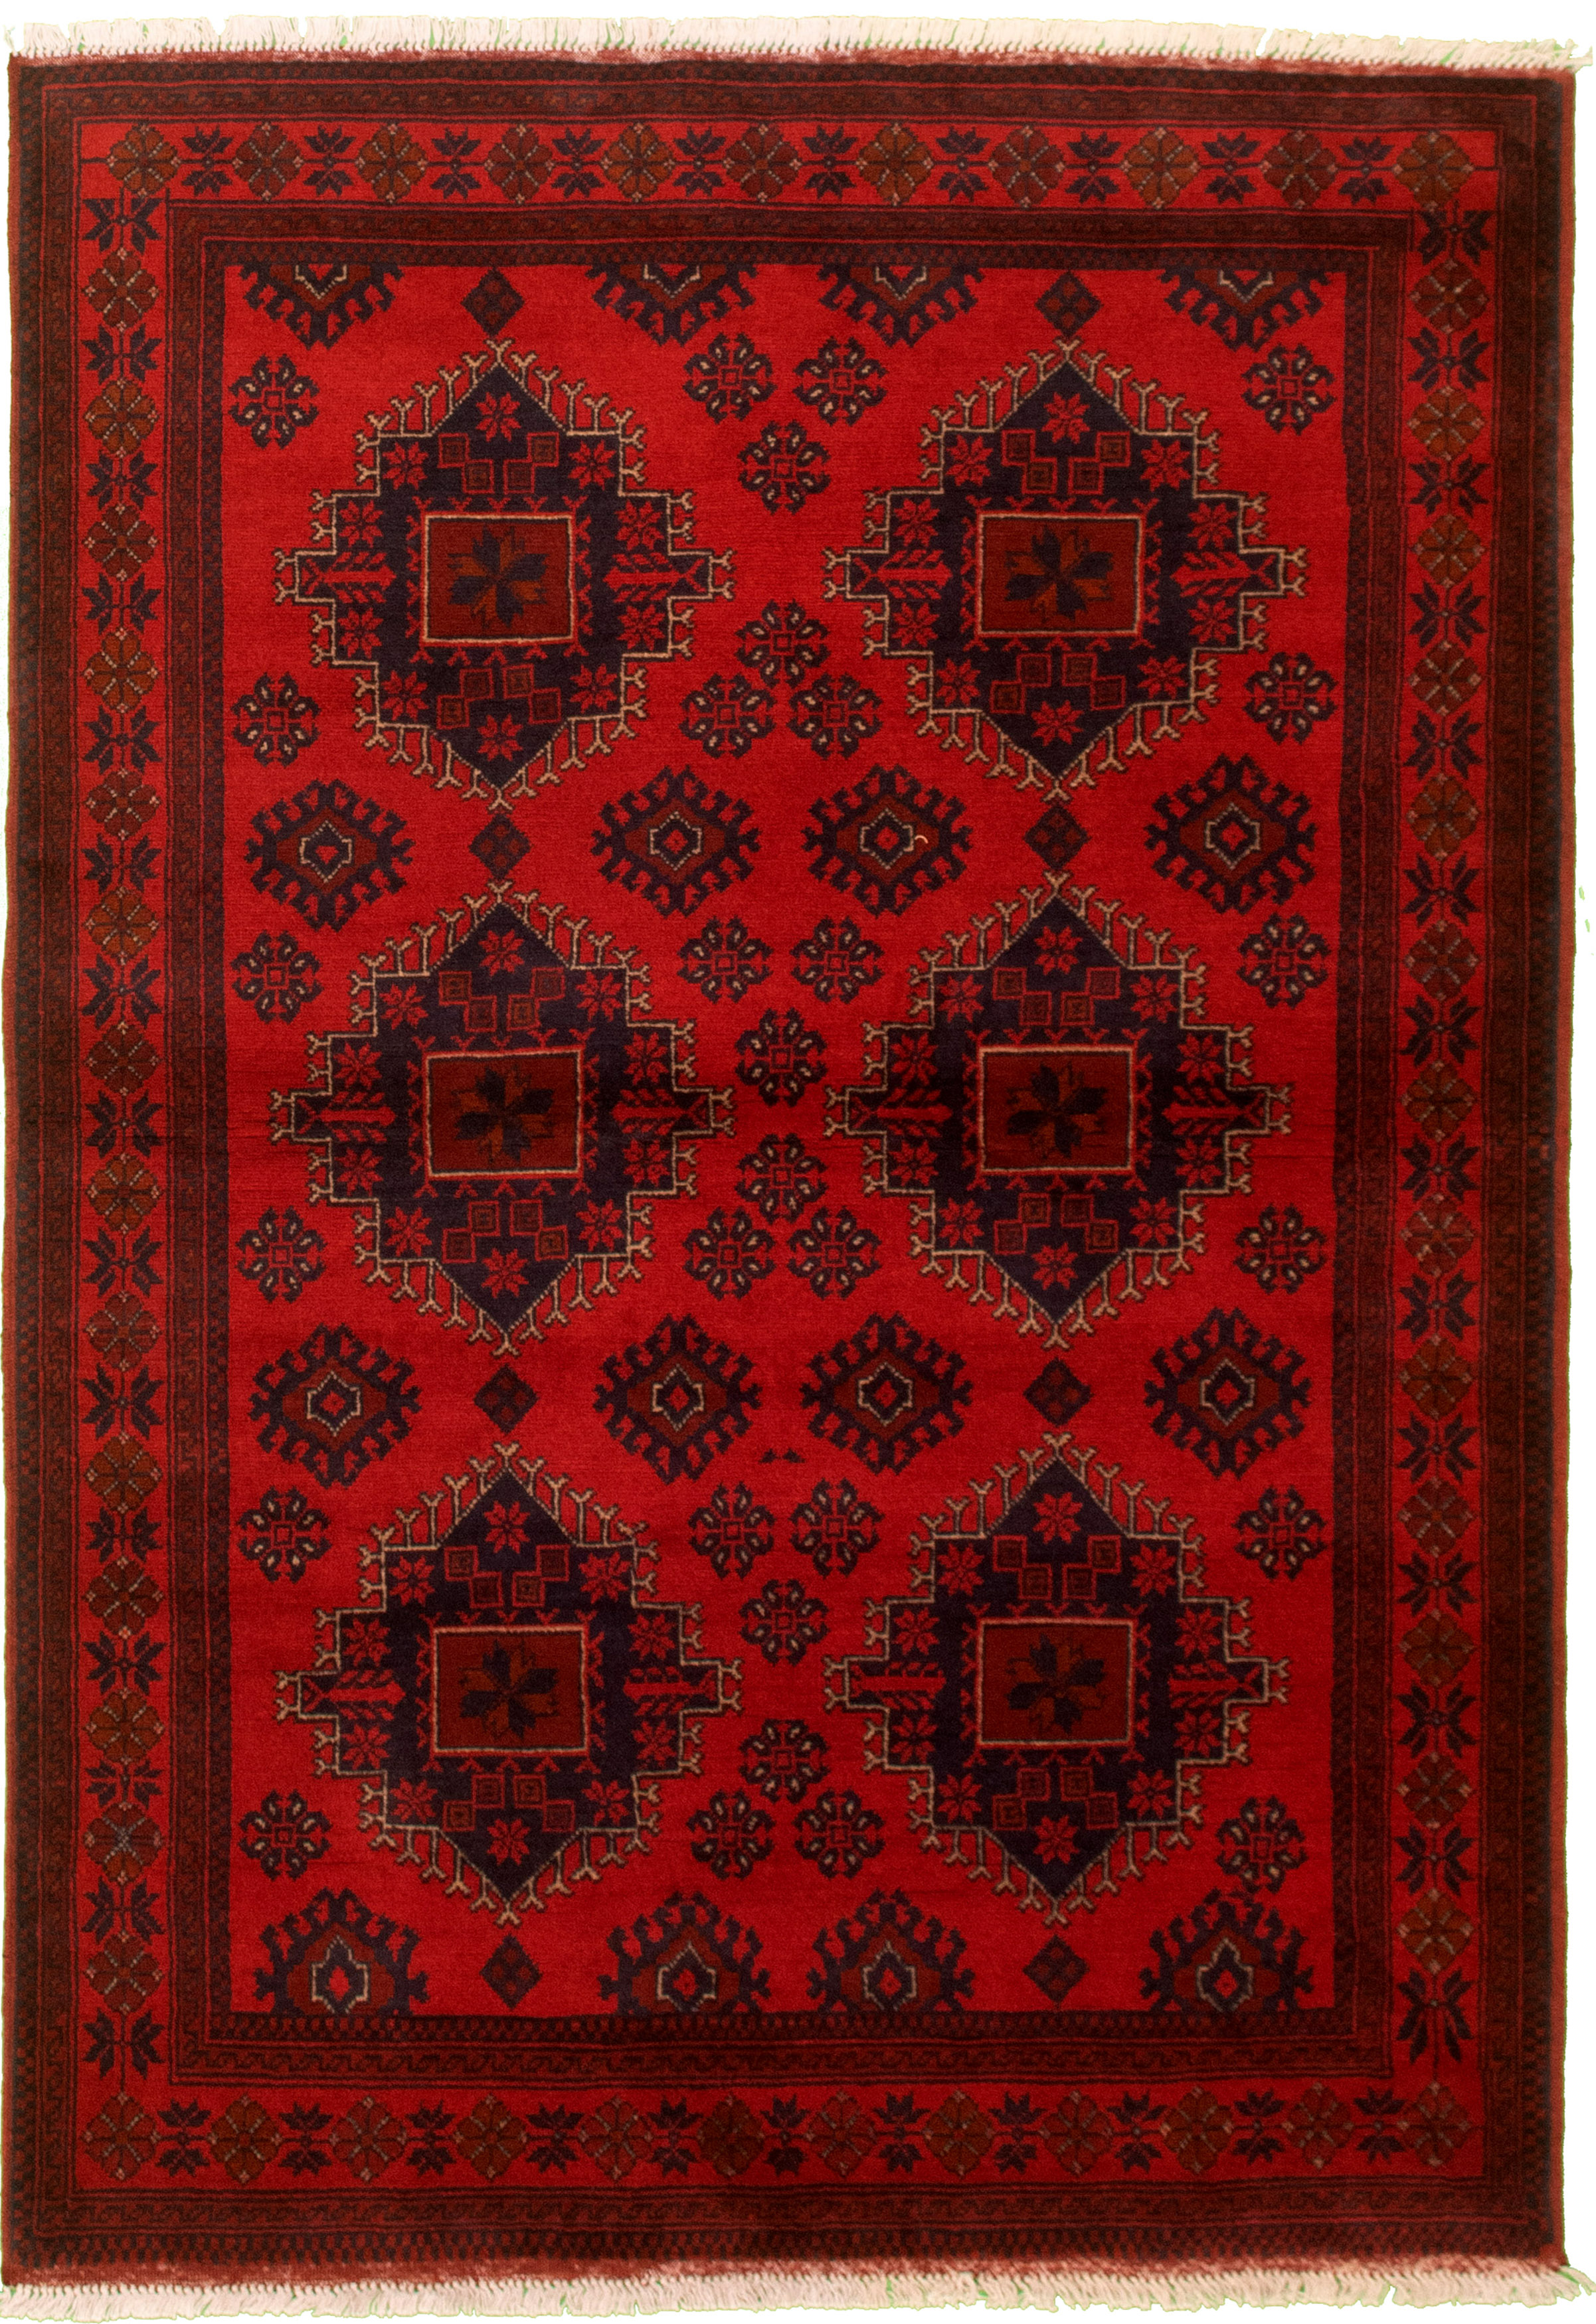 Hand-knotted Finest Khal Mohammadi Red Wool Rug 4'6" x 6'6" Size: 4'6" x 6'6"  